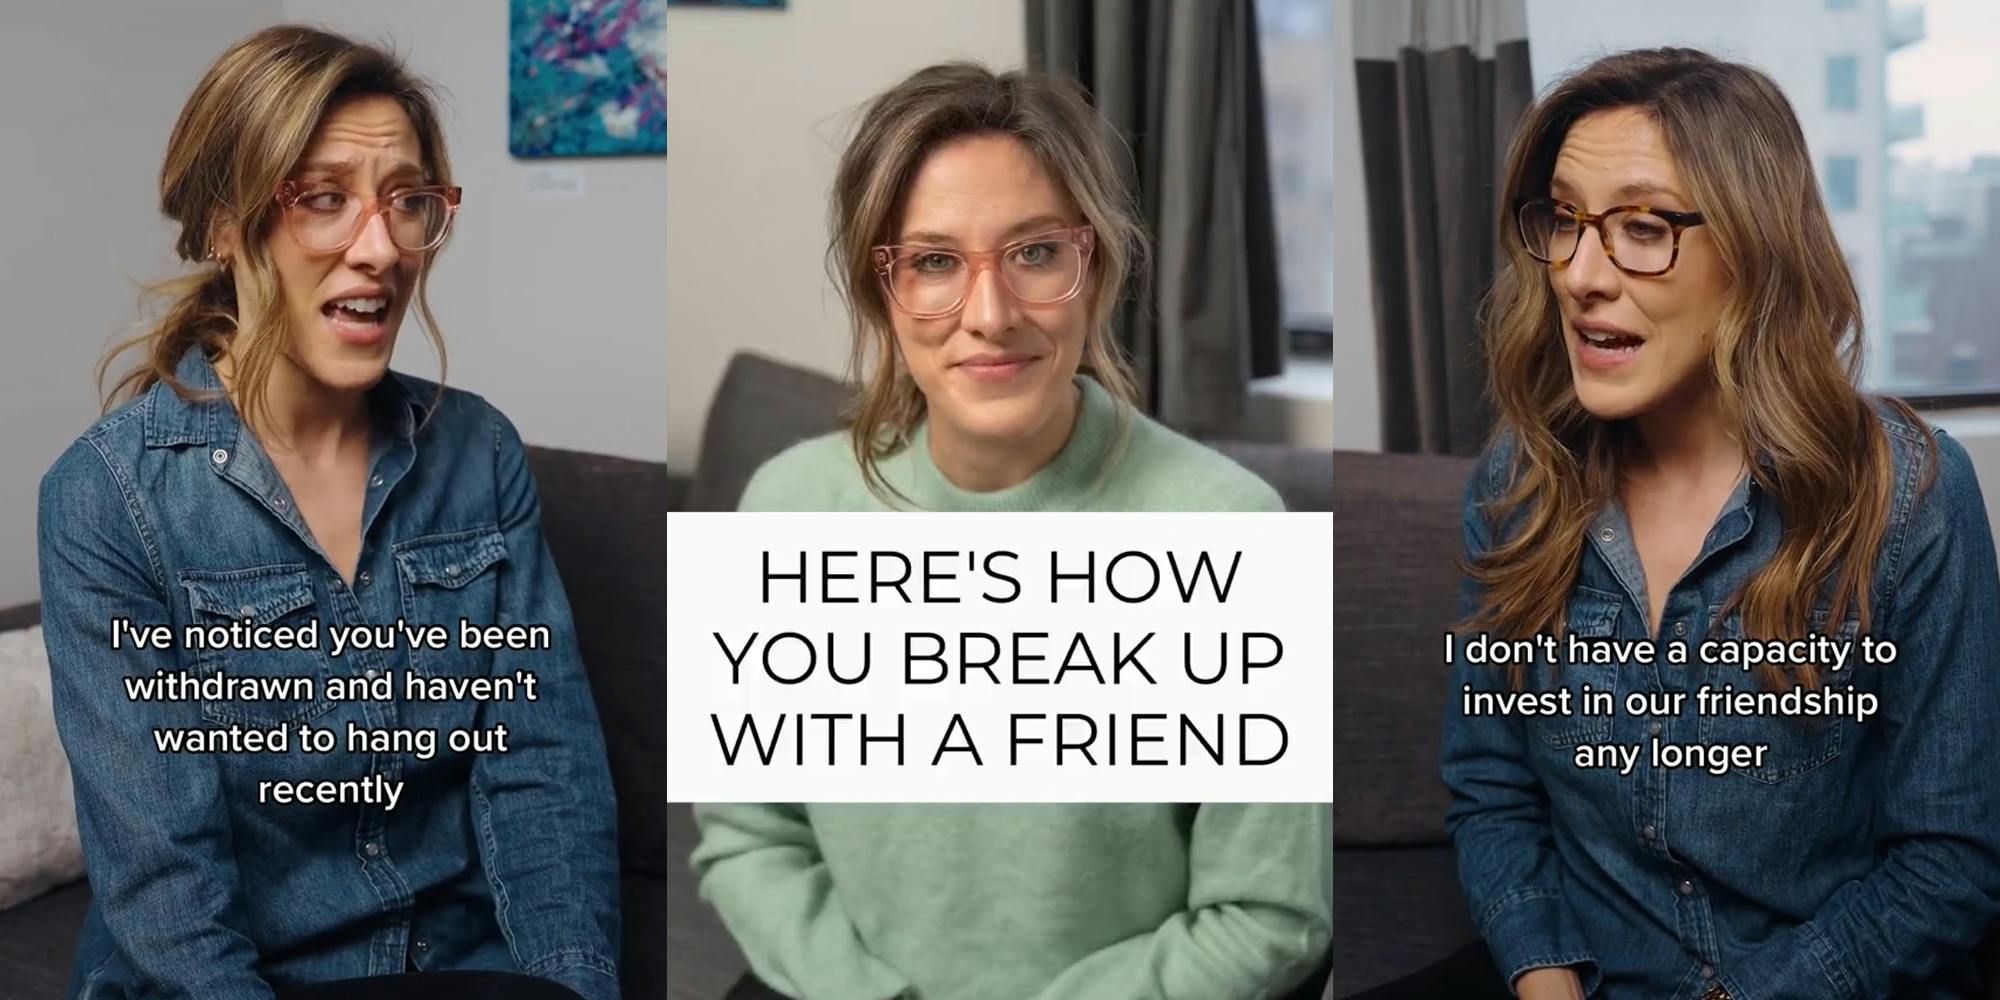 woman speaking on couch with caption "I've noticed you've been withdrawn and haven't wanted to hang out recently" (l) woman speaking on couch with caption "HERE'S HOW YOU BREAK UP WITH A FRIEND" (c) woman speaking on couch with caption "I don't have a capacity to invest in our friendship any longer" (r)